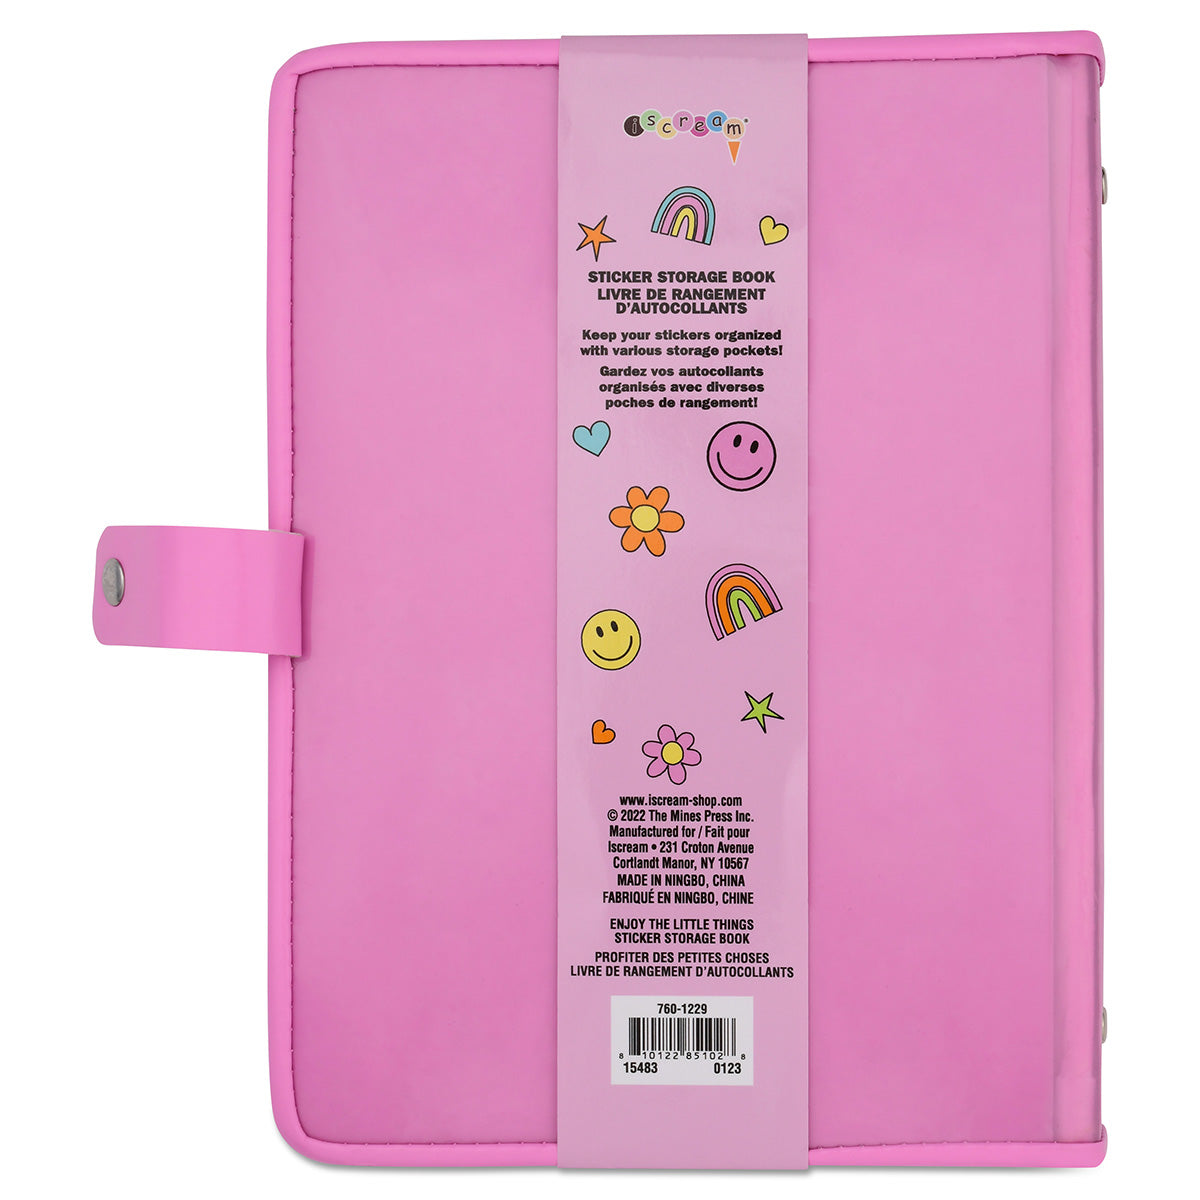 “Enjoy The Little Things” Sticker Storage Book by Iscream #760-1229